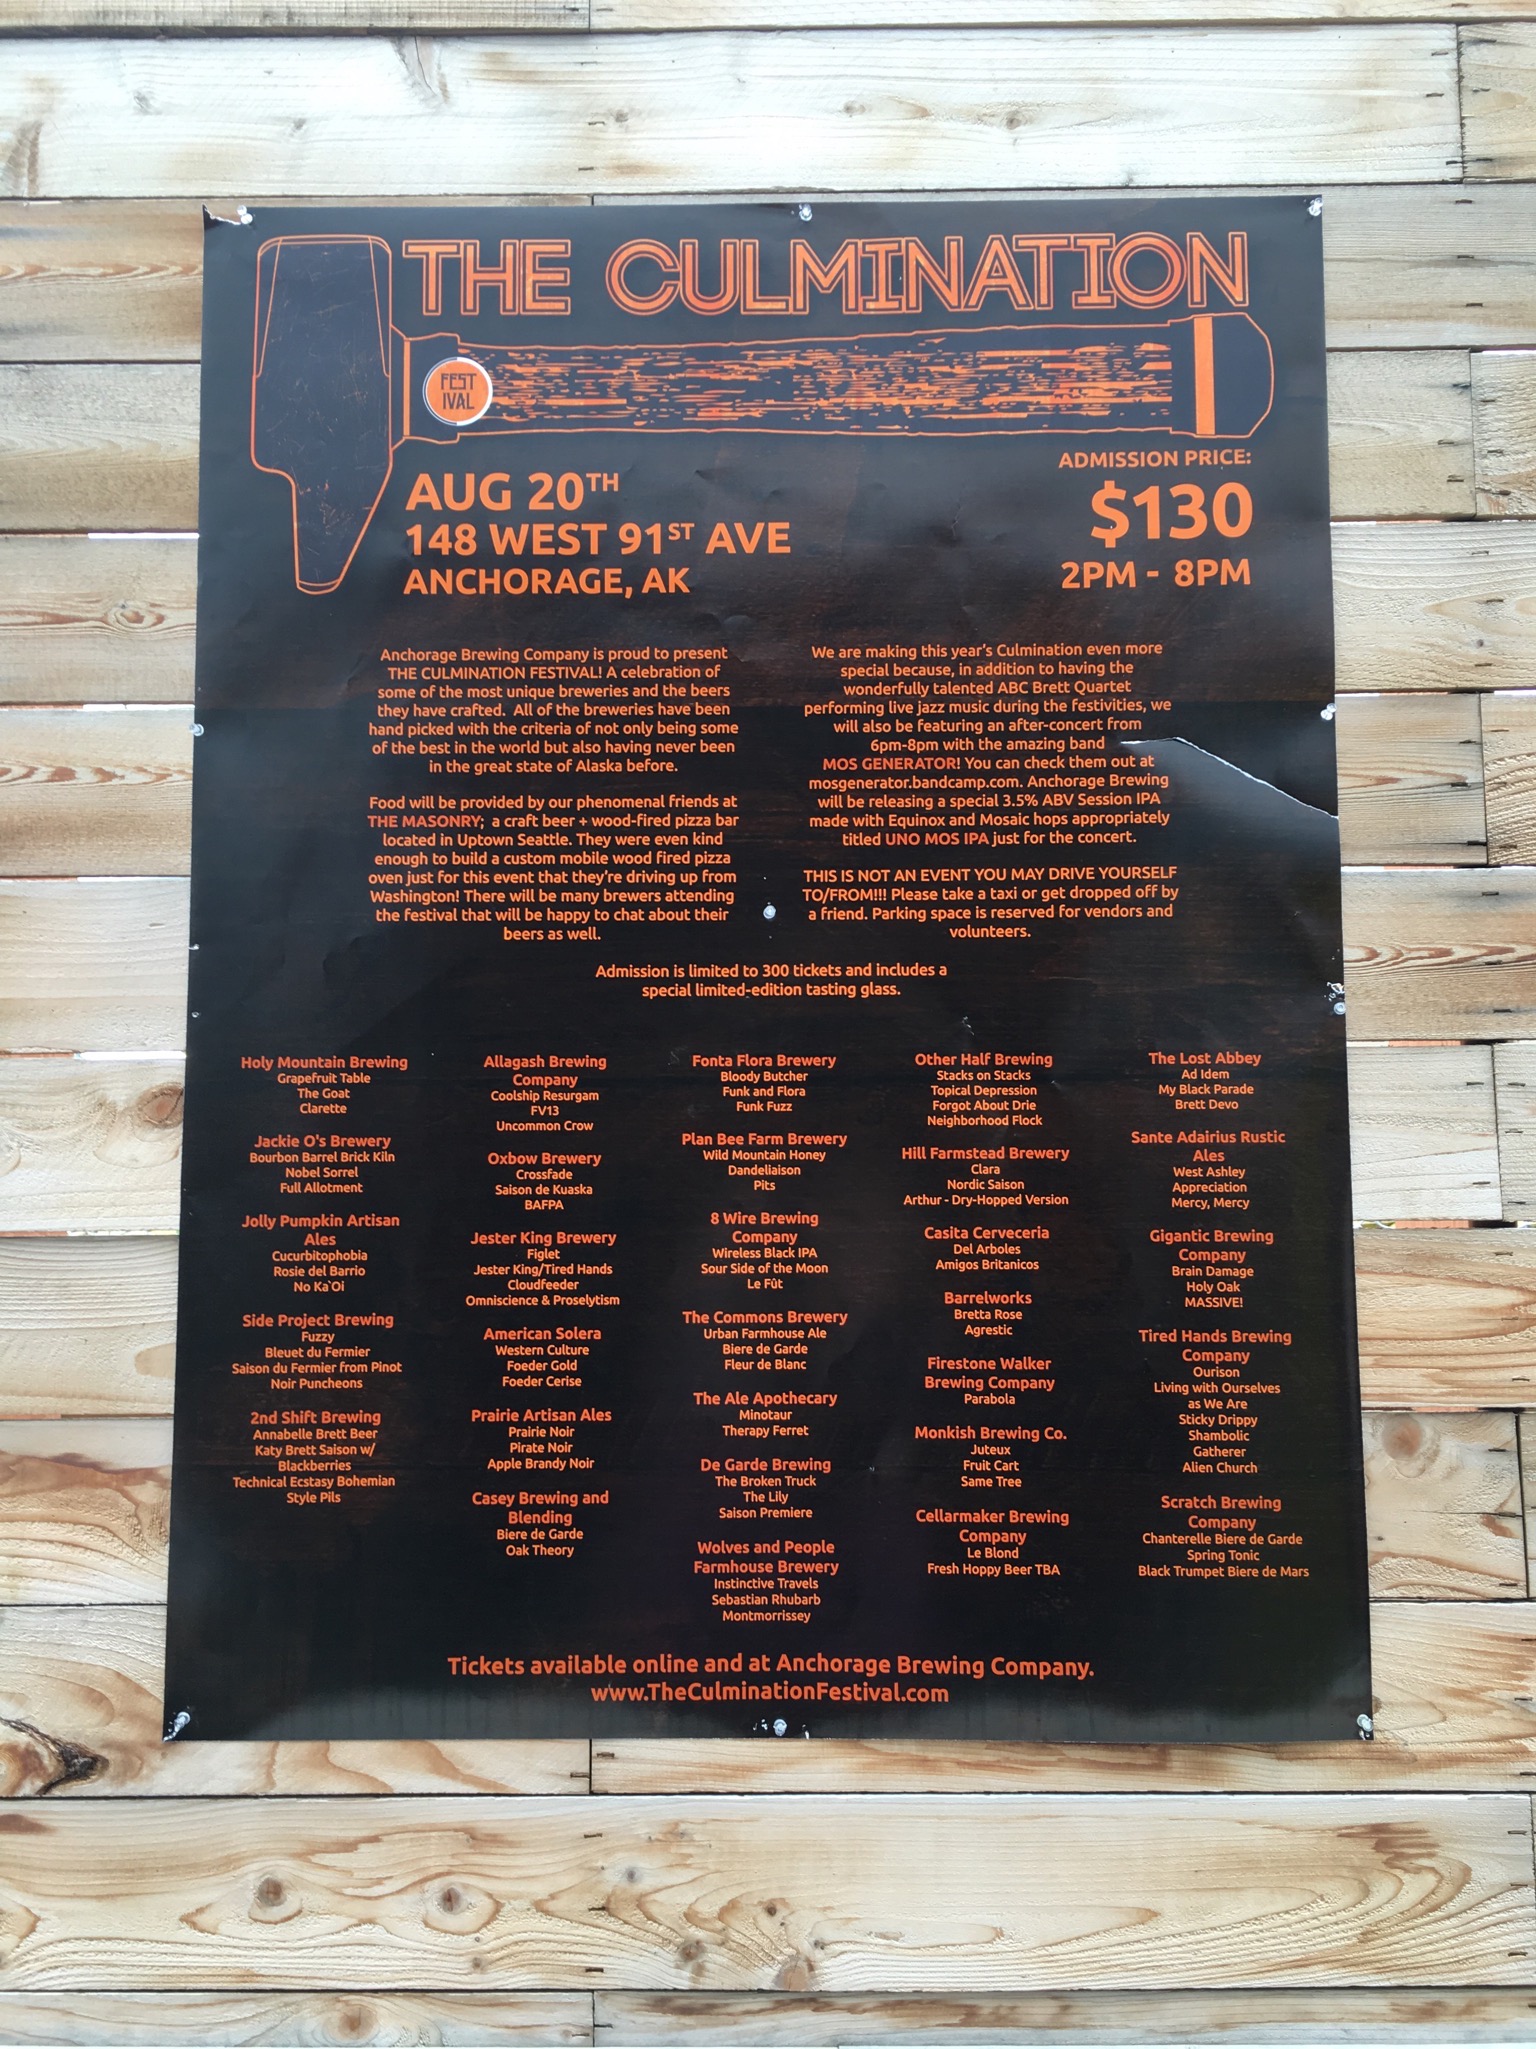 The-Culmination-Fest-Poster-at-Anchorage-Brewing.-photo-by-Cat-Stelzer.jpg